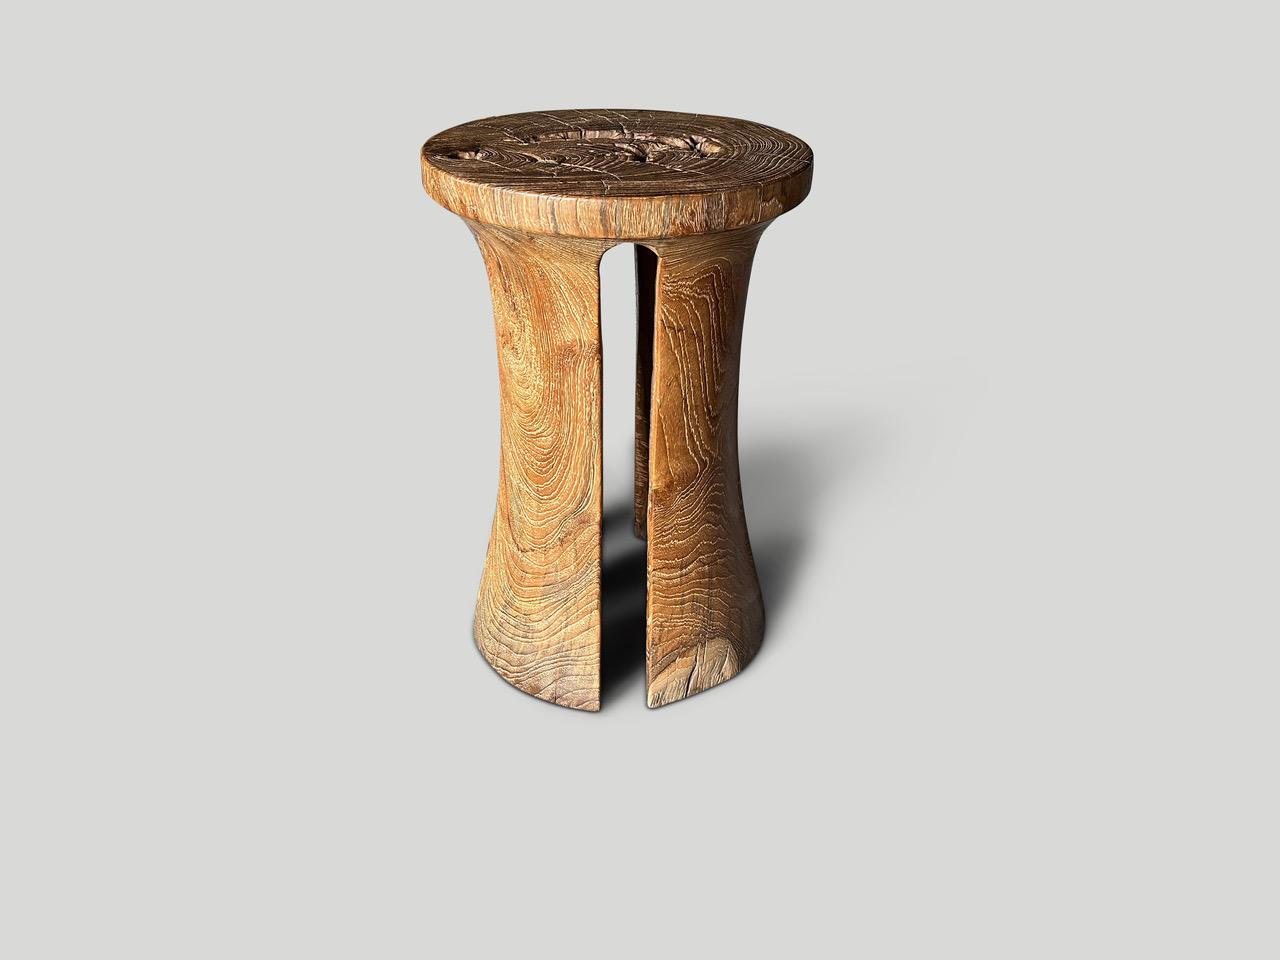 Andrianna Shamaris Sculptural Teak Wood Side Table or Pedestal In Excellent Condition For Sale In New York, NY